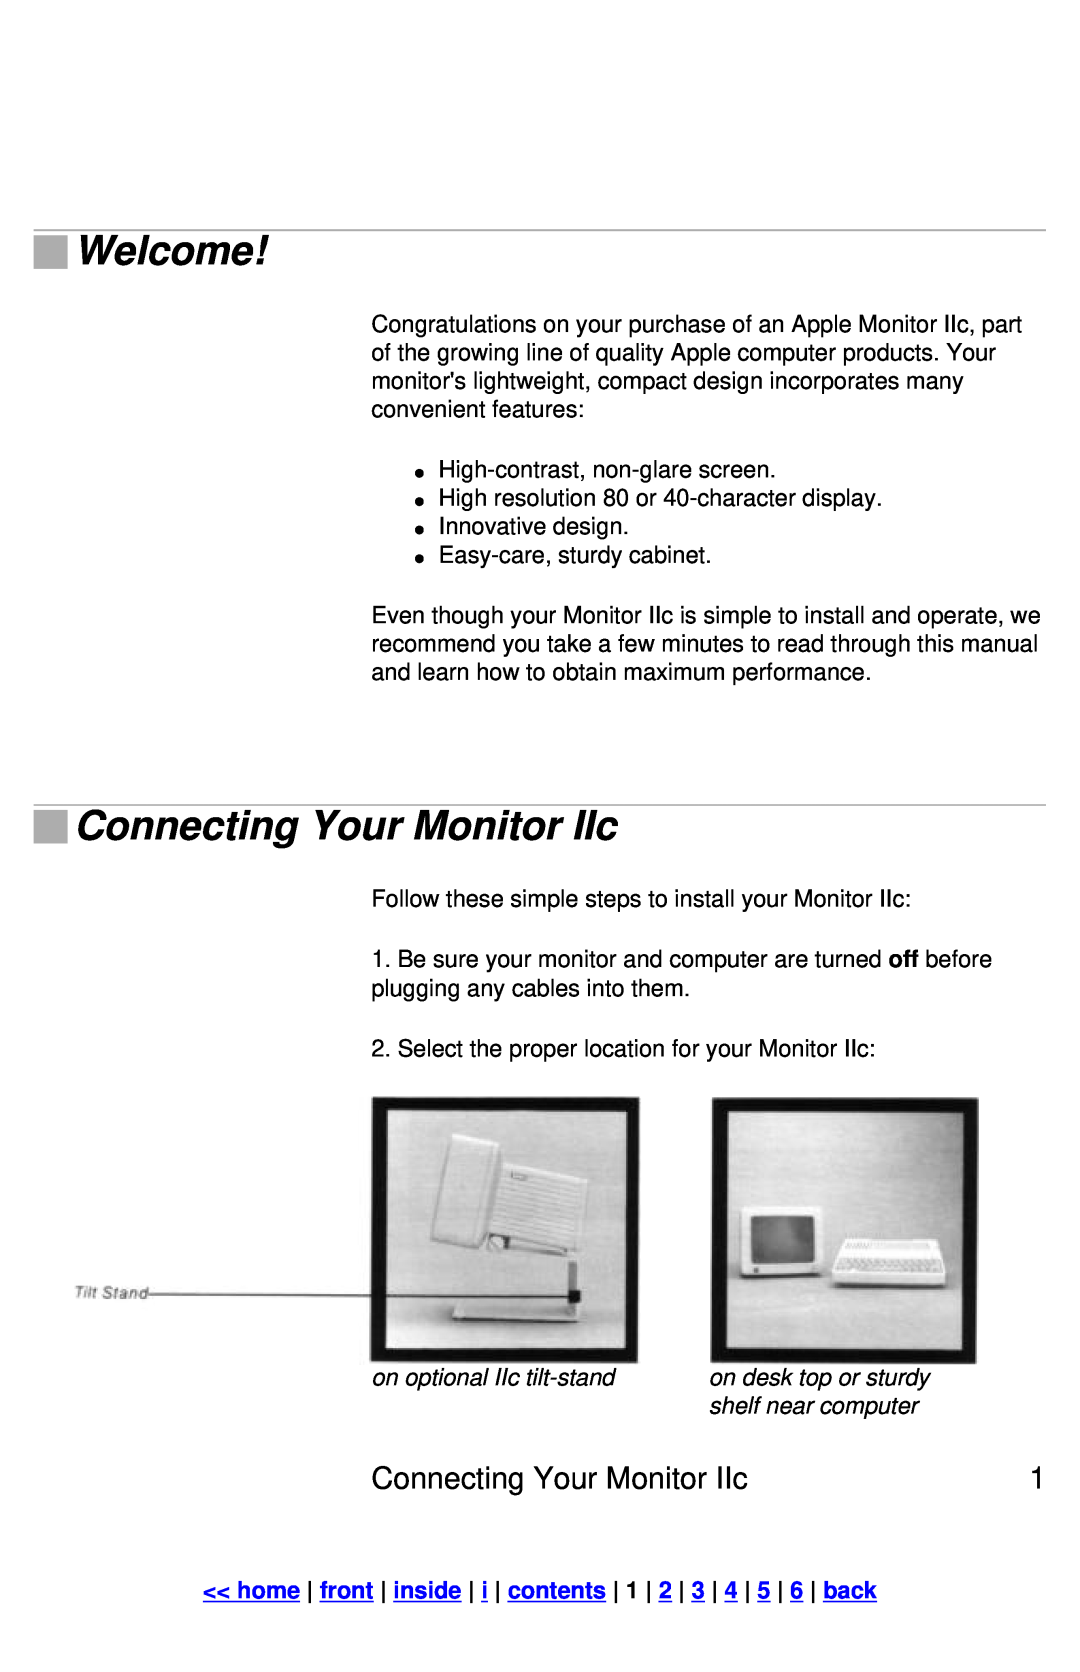 Apple Welcome, Connecting Your Monitor IIc, on optional IIc tilt-stand, on desk top or sturdy, shelf near computer 